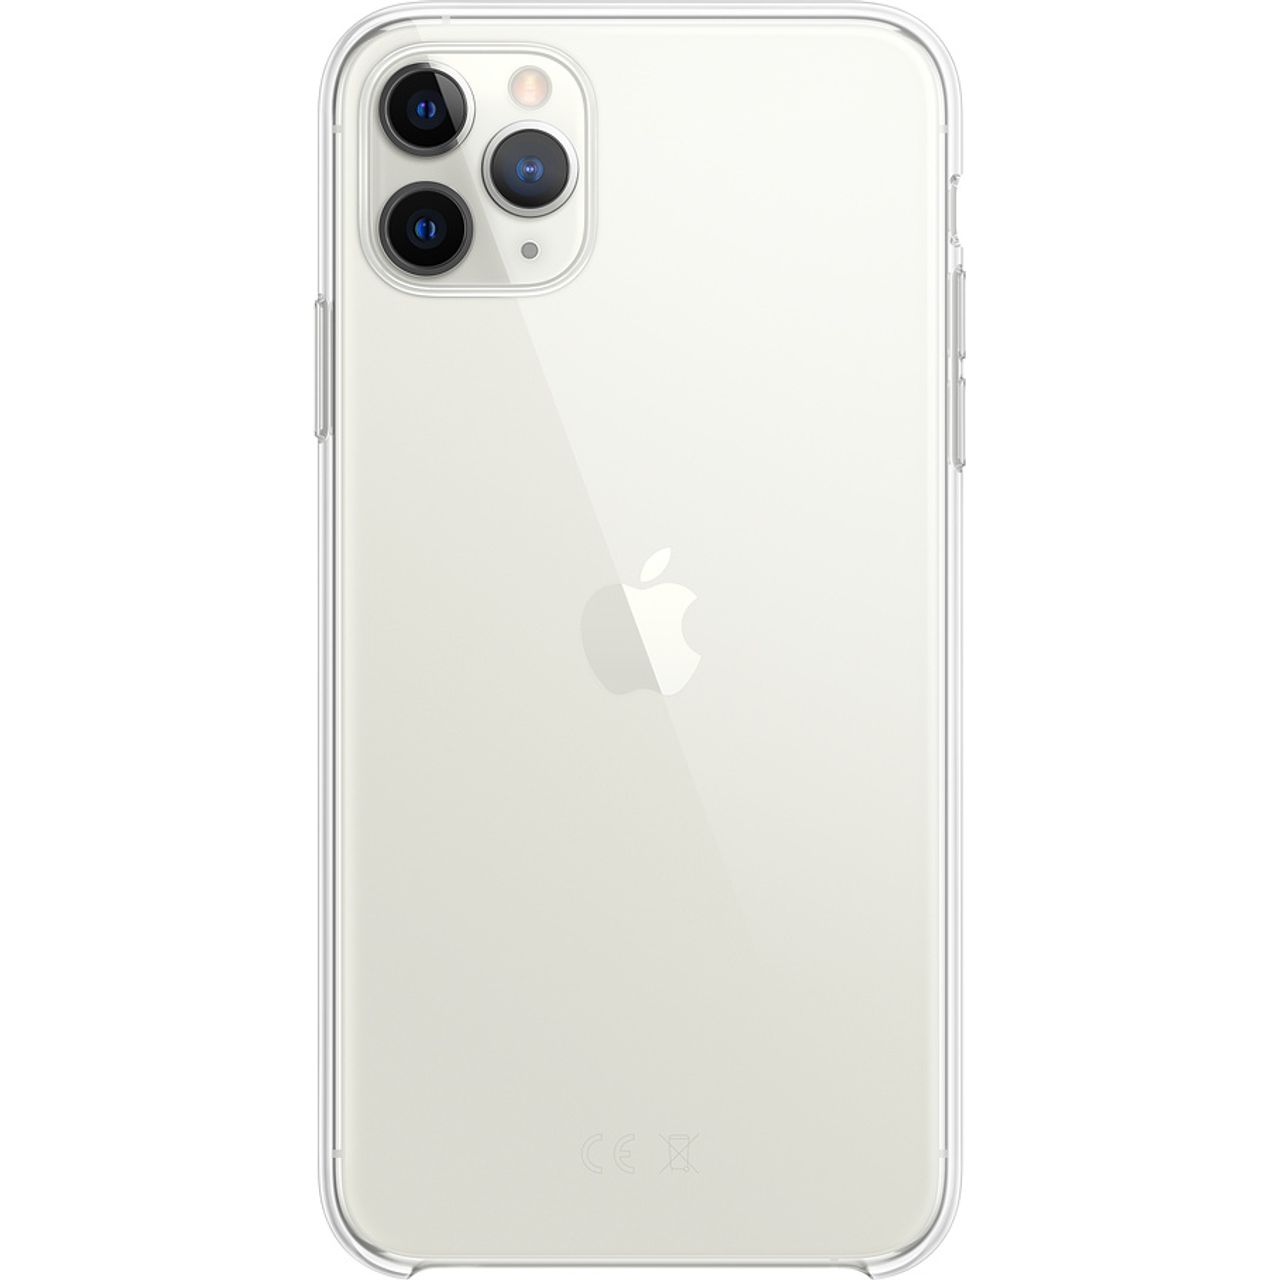 Apple iPhone 11 Pro Max Clear Case for iPhone 11 Pro Max Review